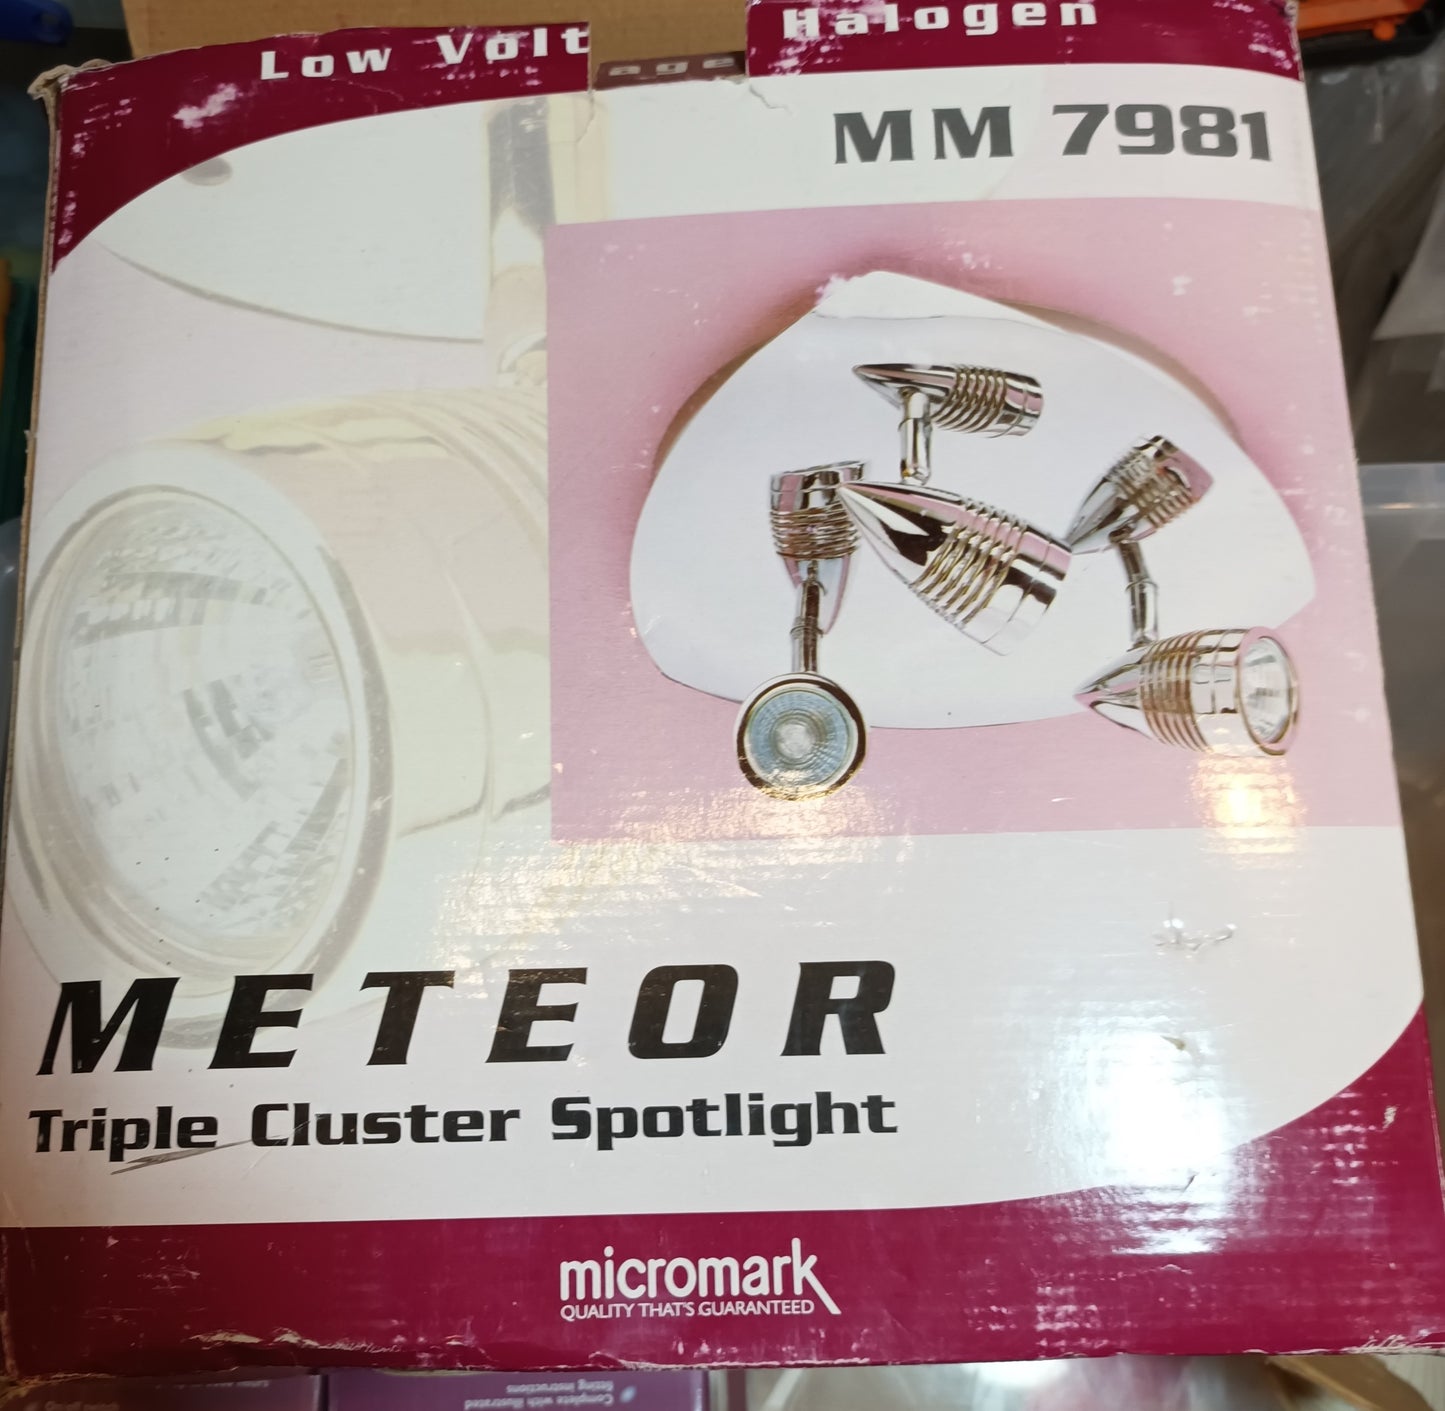 Meteor Low Voltage Triple Cluster Spotlight Fitting MM7981 by Micromark